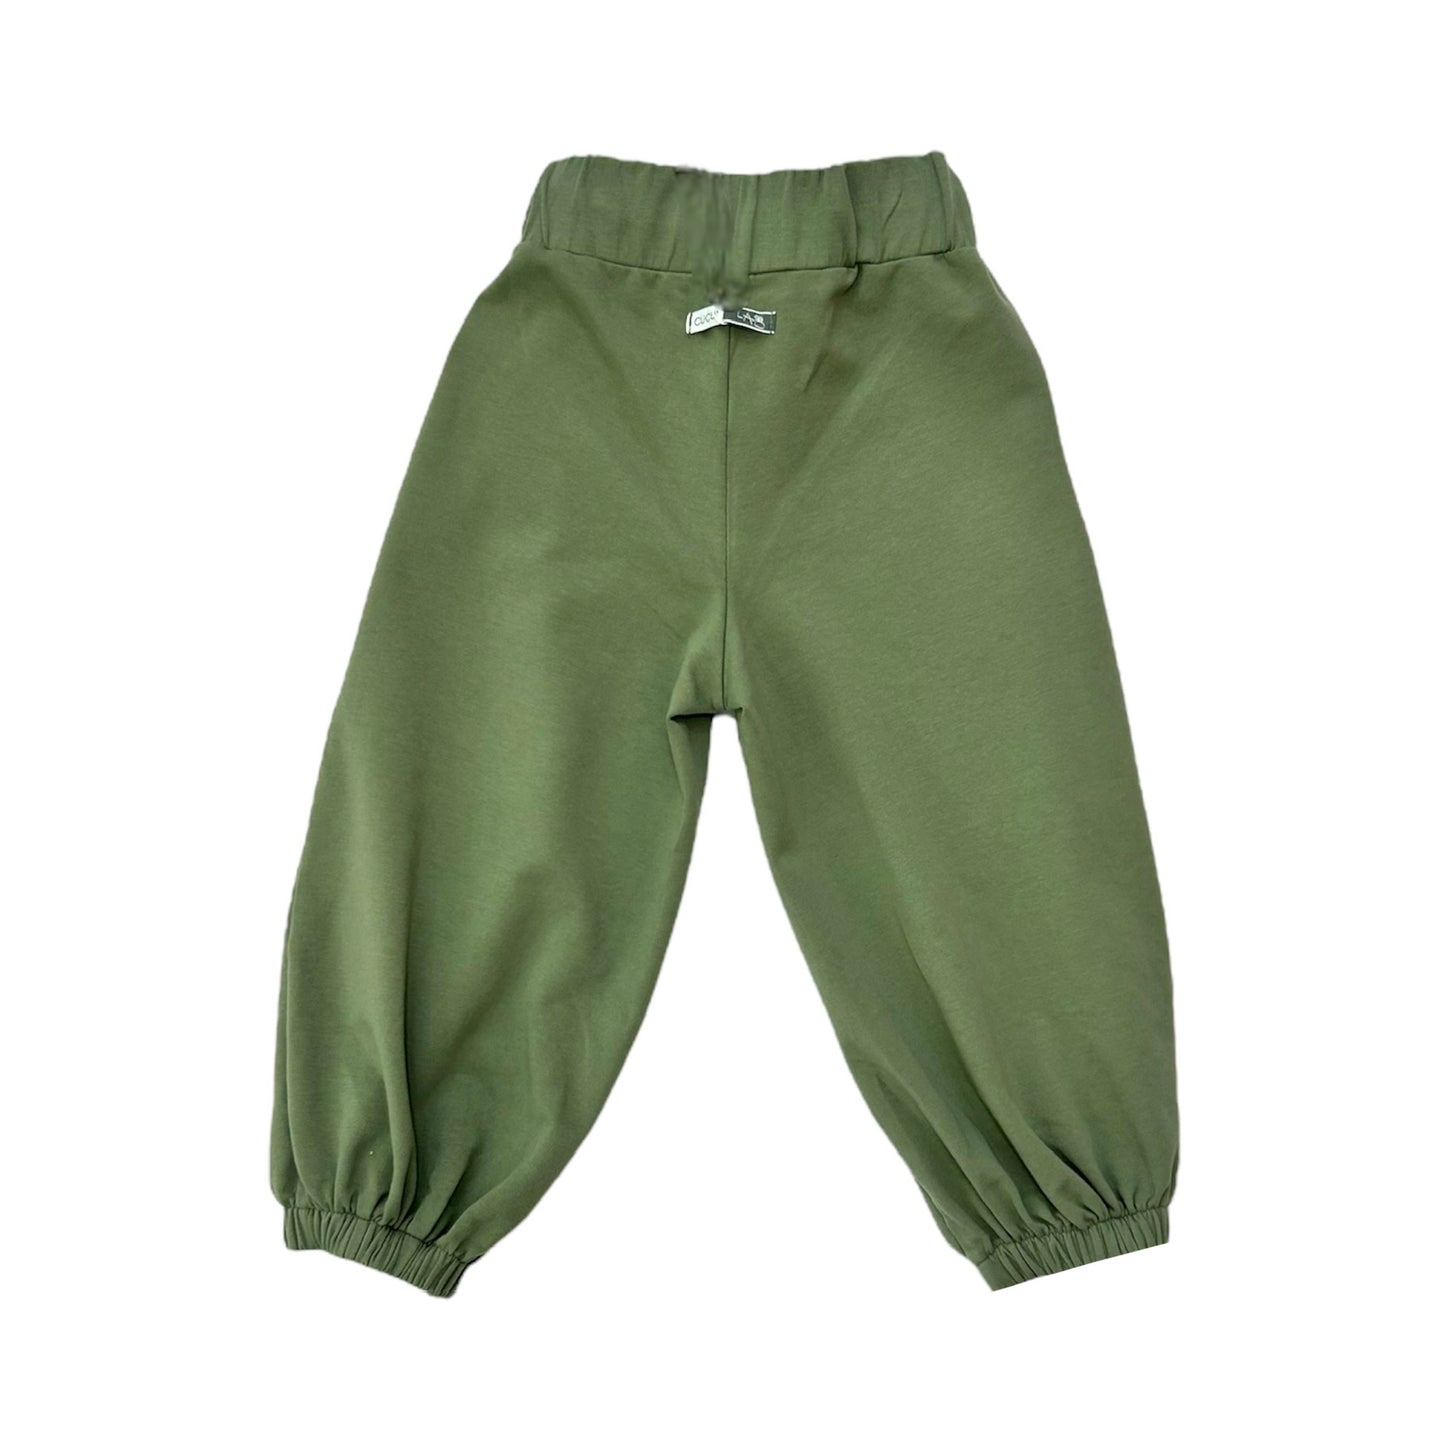 Sage sports trousers